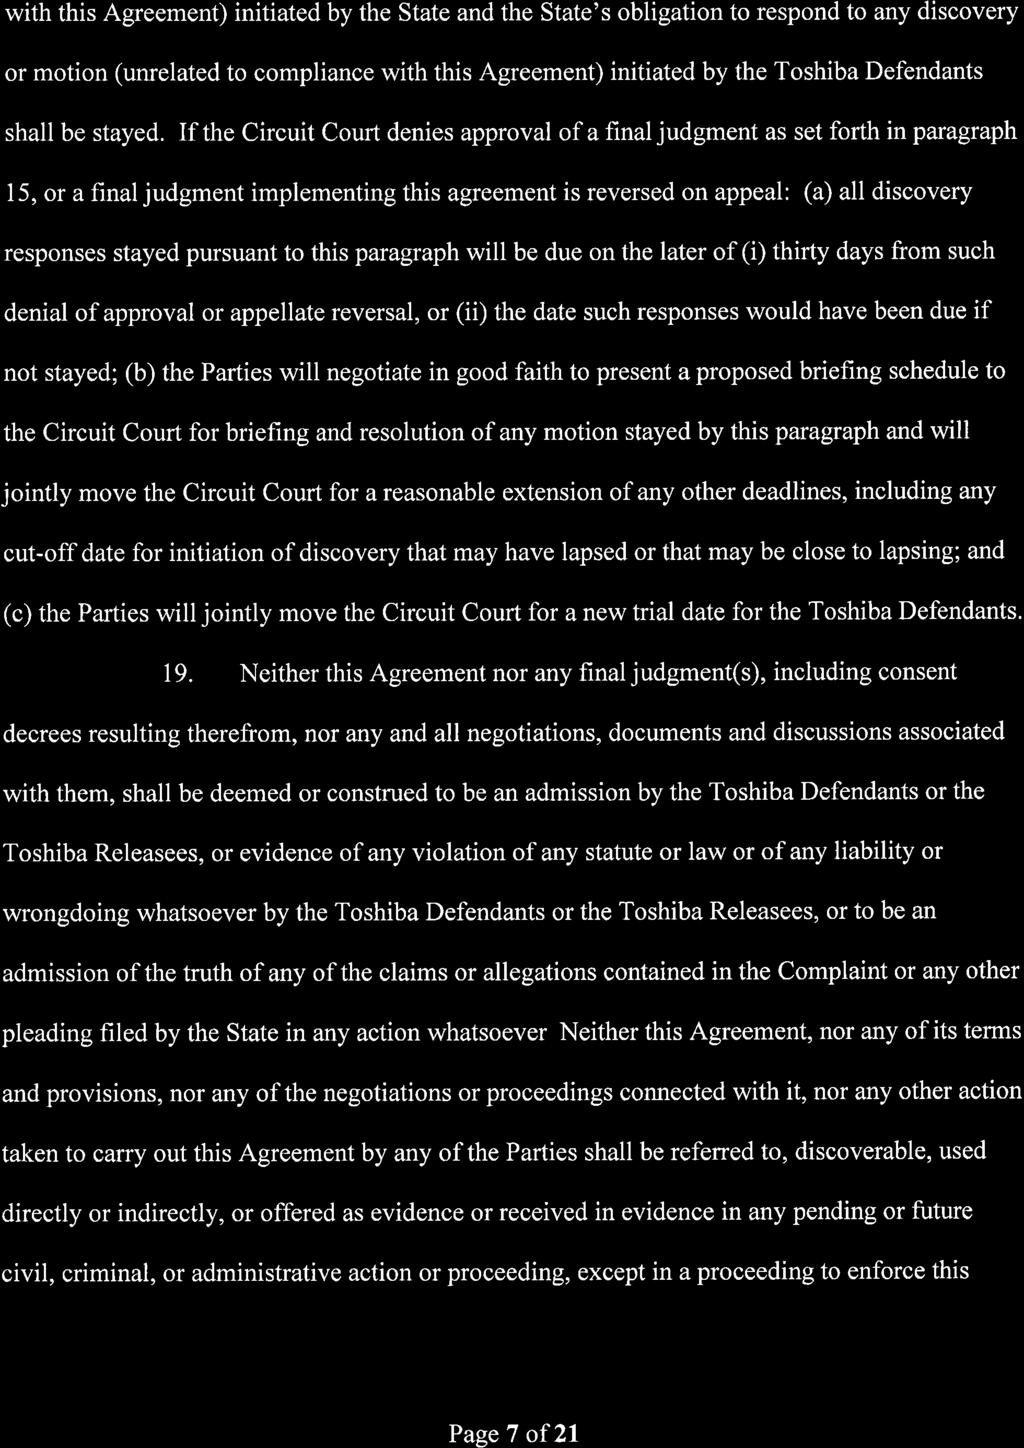 with this Agreement) initiated by the State and the State's obligation to respond to any discovery or motion (unrelated to compliance with this Agreement) initiated by the Toshiba Defendants shall be